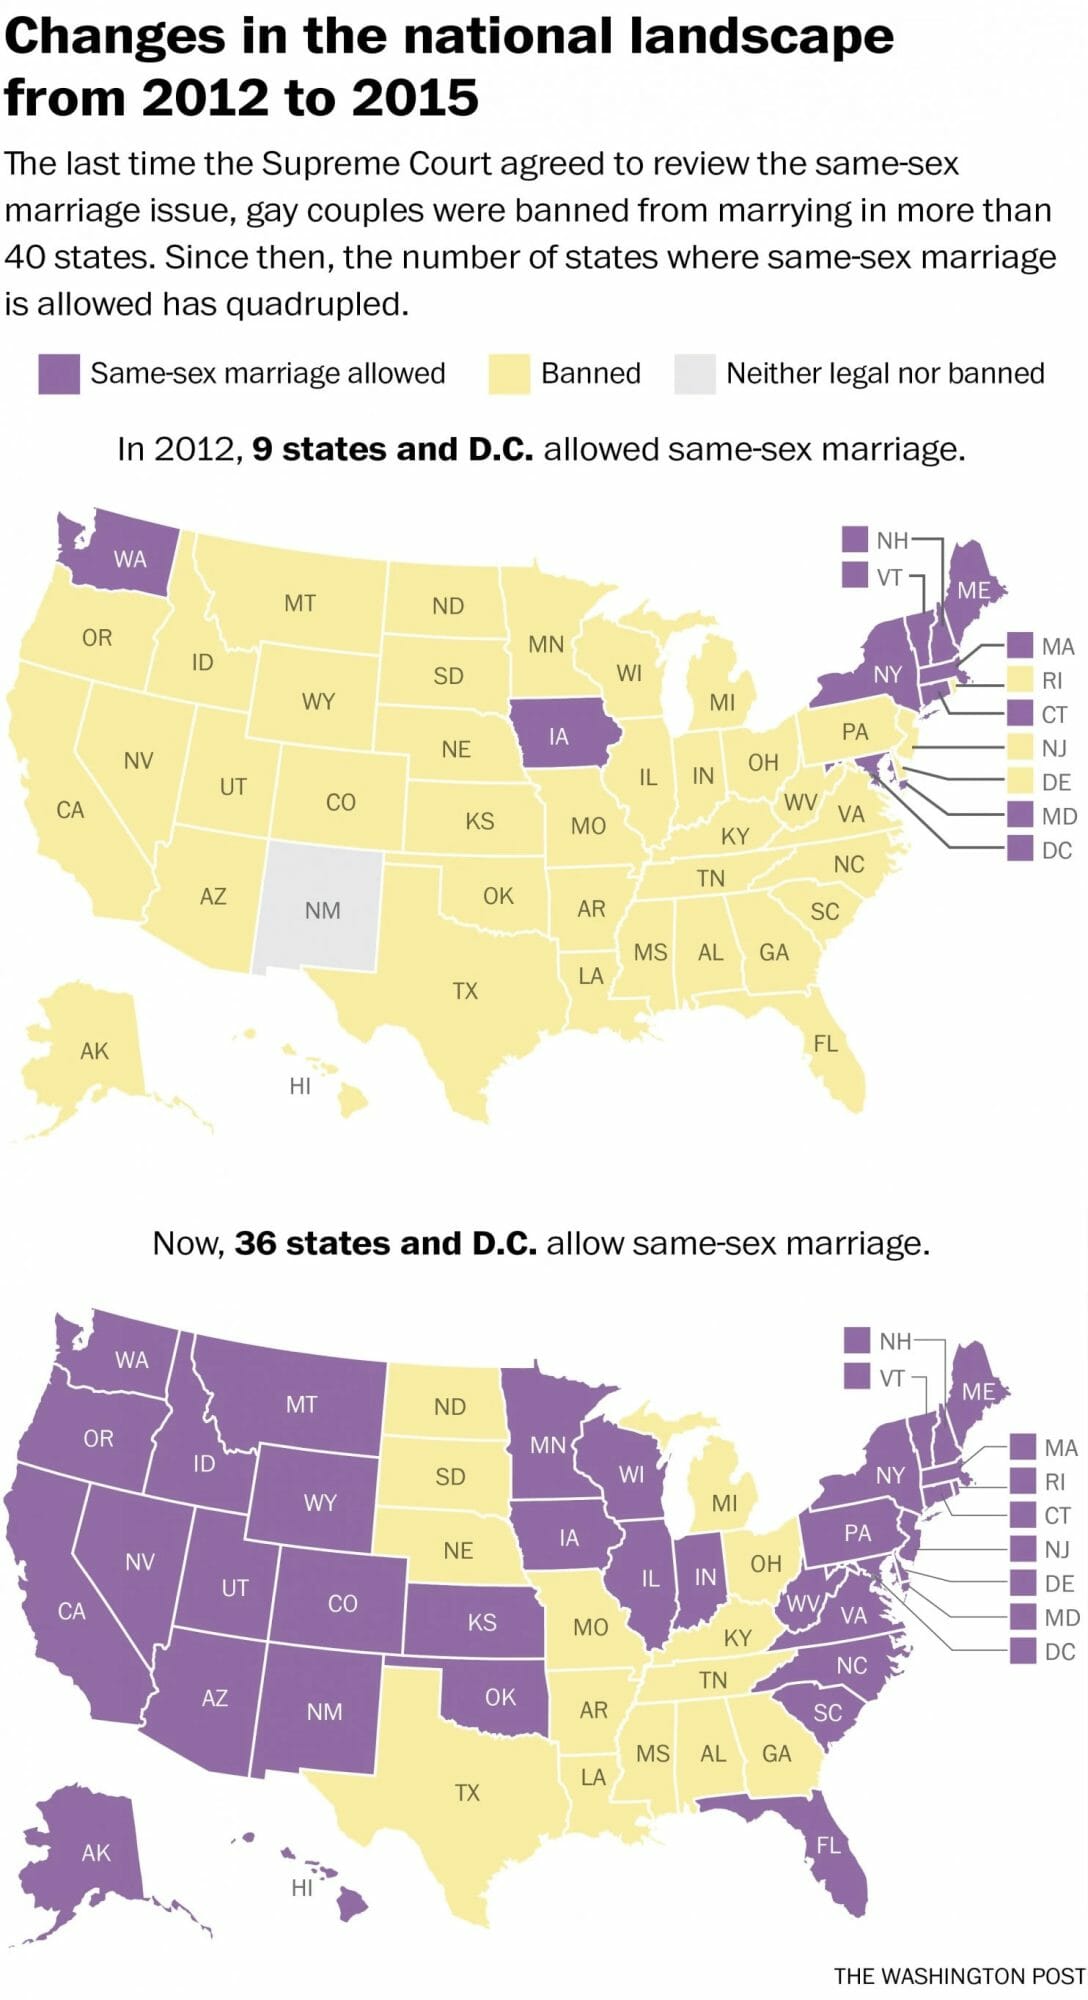 Mark Berman, “How same-sex marriage in the U.S. changed since the Supreme Court acted in 2013,” The Washington Post, January 16, 2015, https://www.washingtonpost.com/news/post-nation/wp/2015/01/16/how-same-sex-marriage-in-the-u-s-changed-since-the-supreme-court-last-heard-the-issue/.